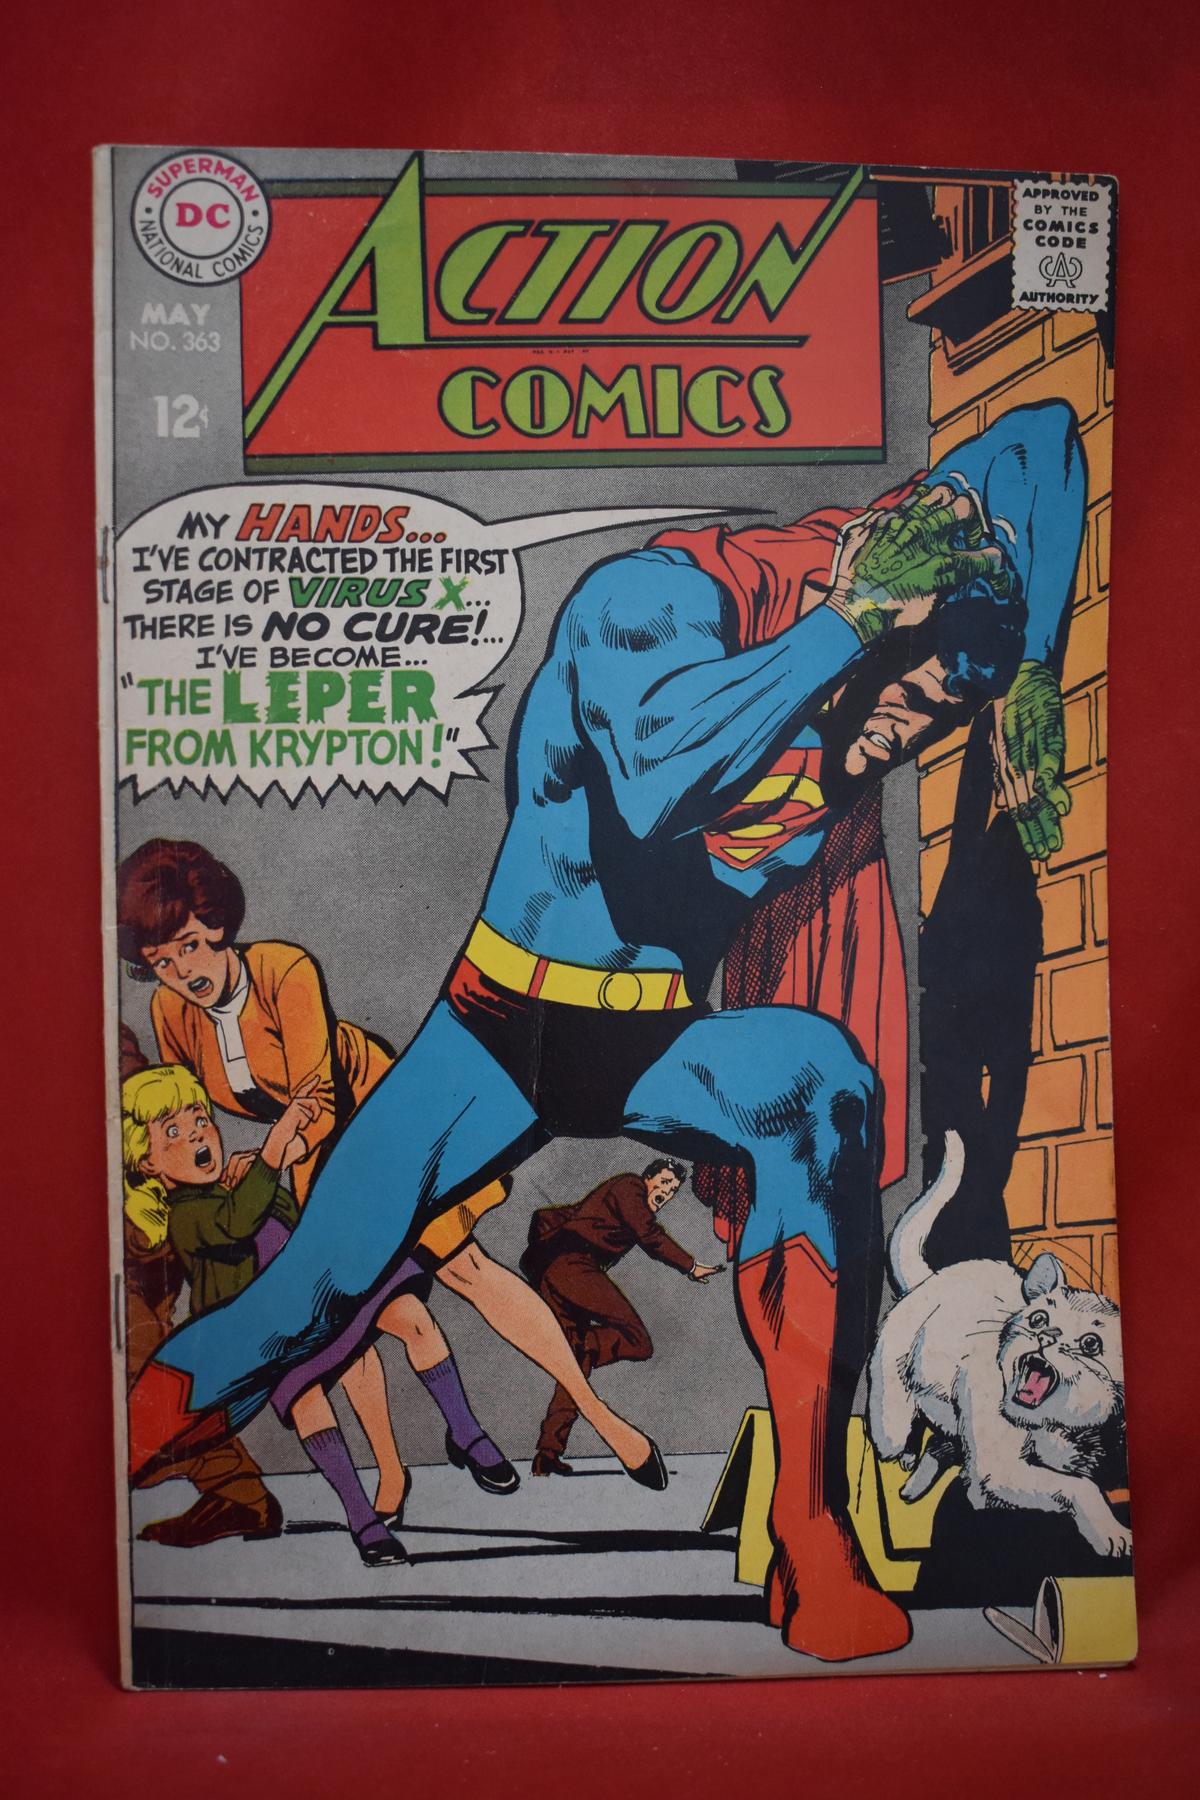 ACTION COMICS #363 | ICONIC NEAL ADAMS COVER - 1968